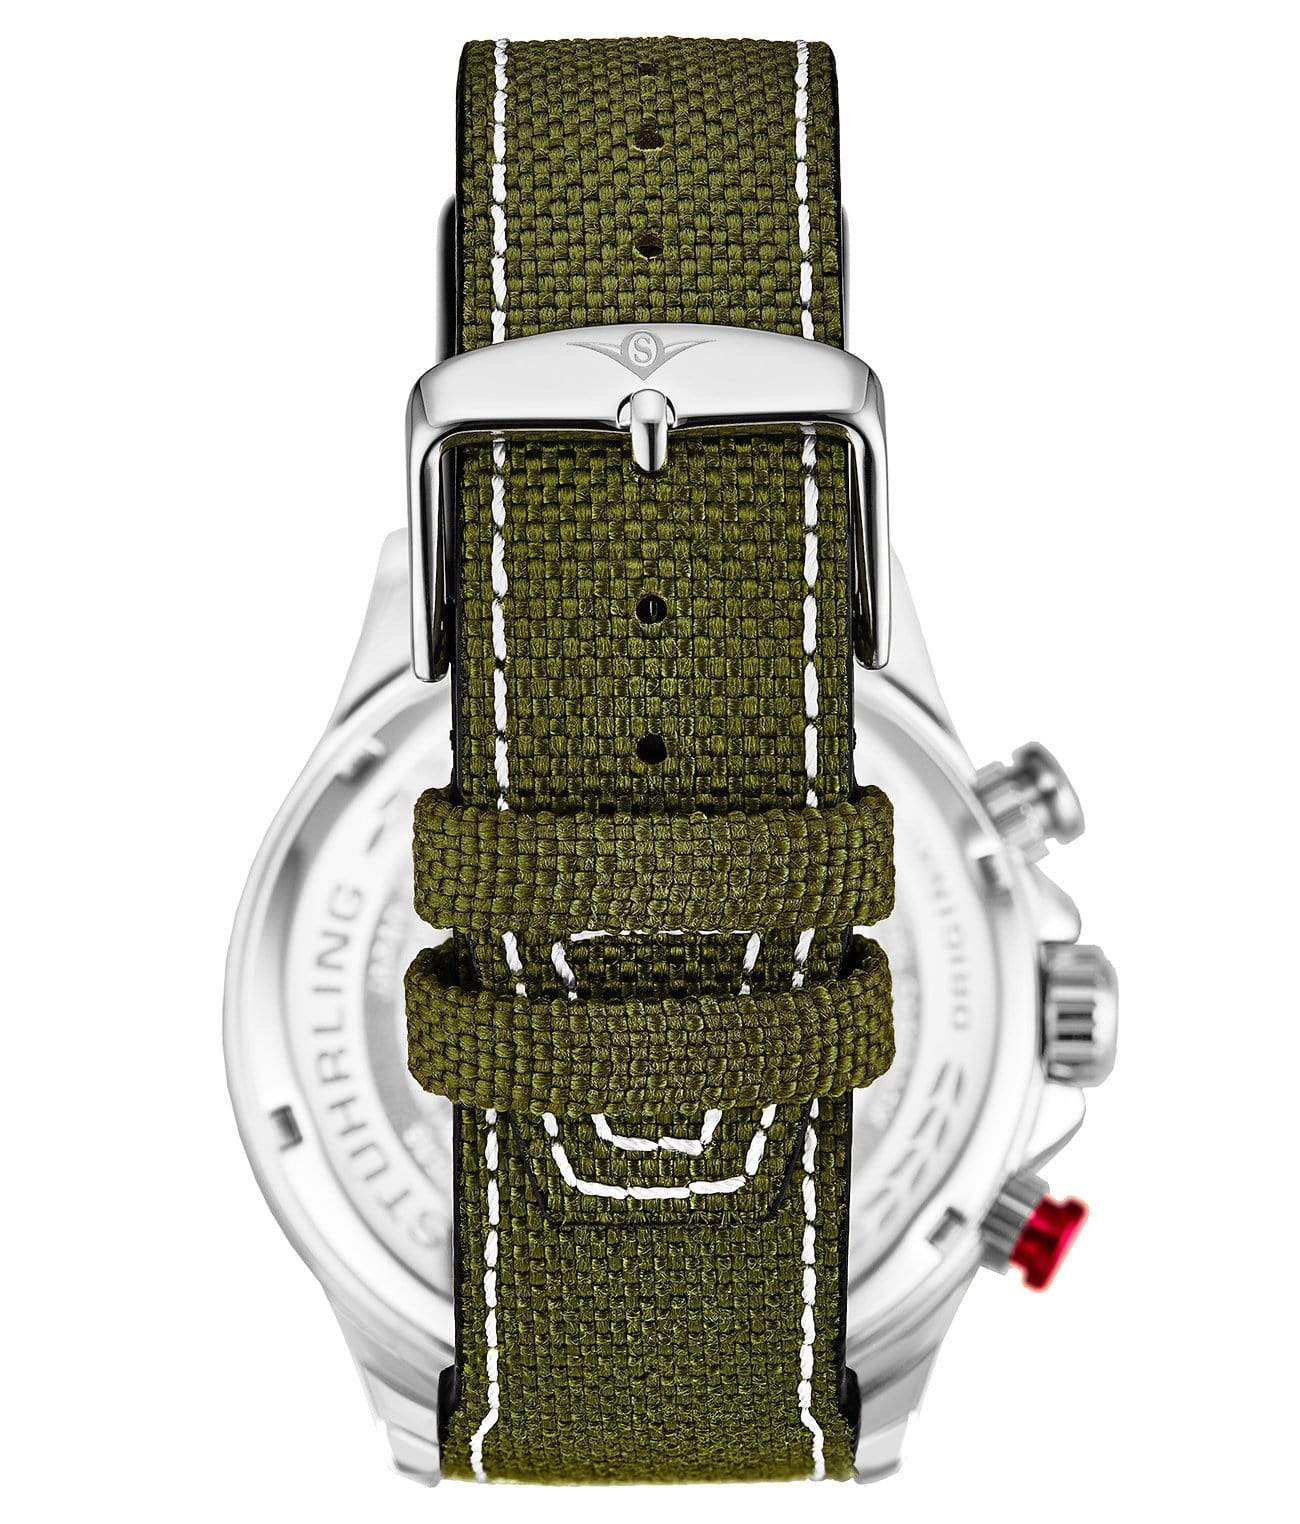 Green Dial / Silver Case / Green Leather Strap Silver Tang Buckle